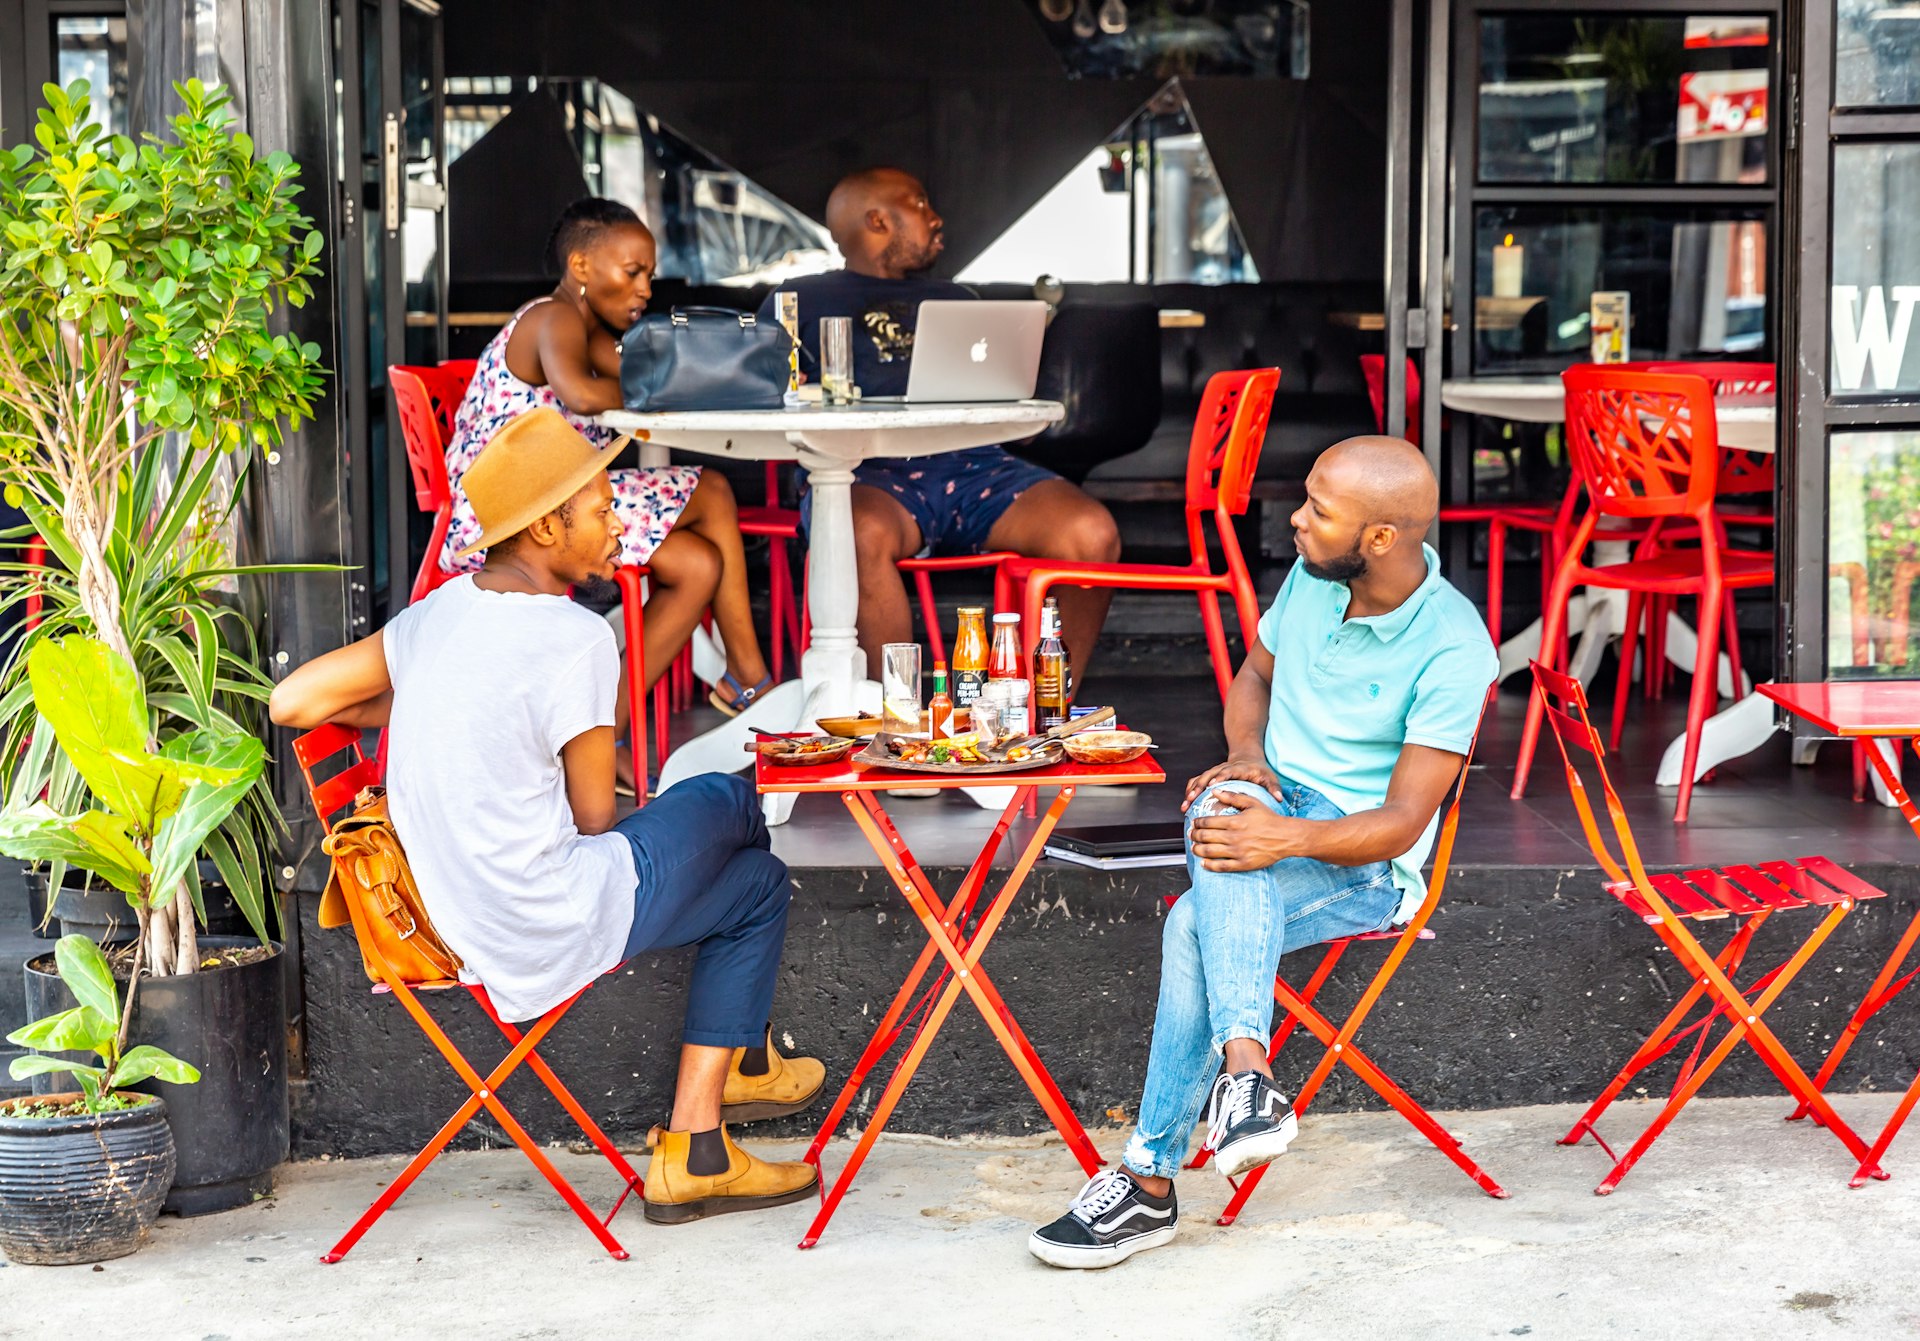 People at an outdoor cafe in Maboneng Precinct, Johannesburg, South Africa